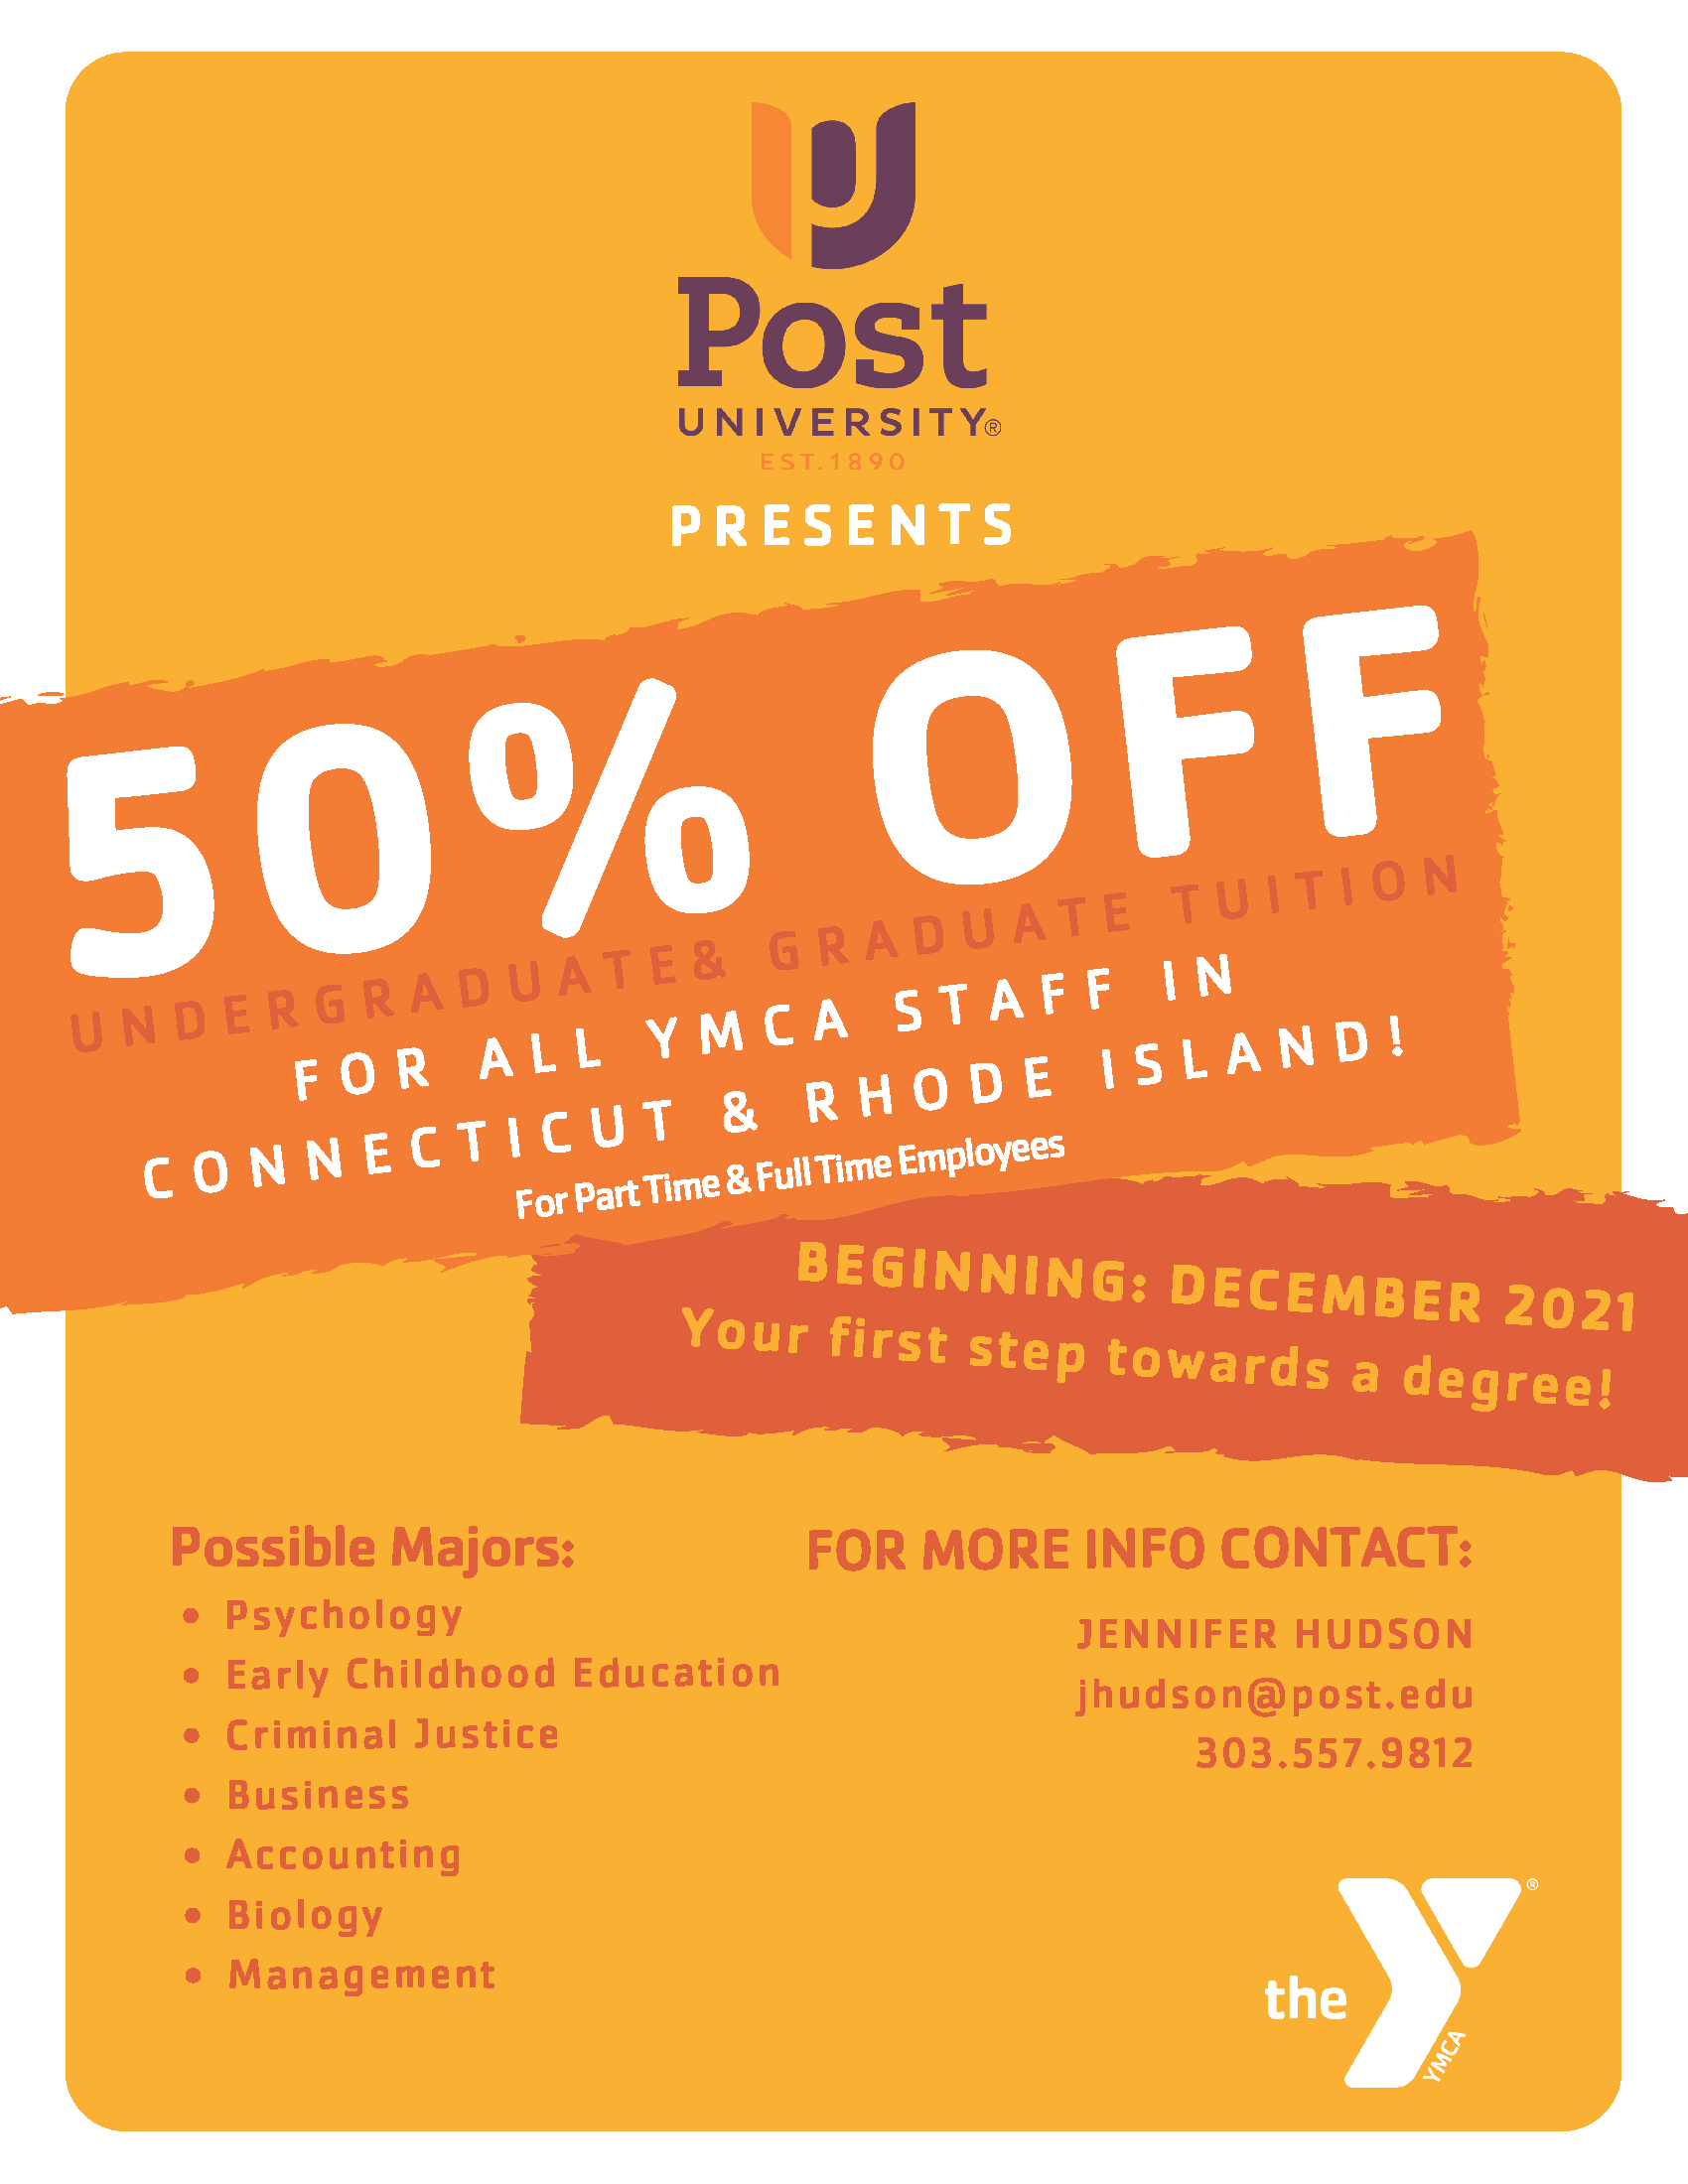 Post University 50% off Tuition for YMCA Staff